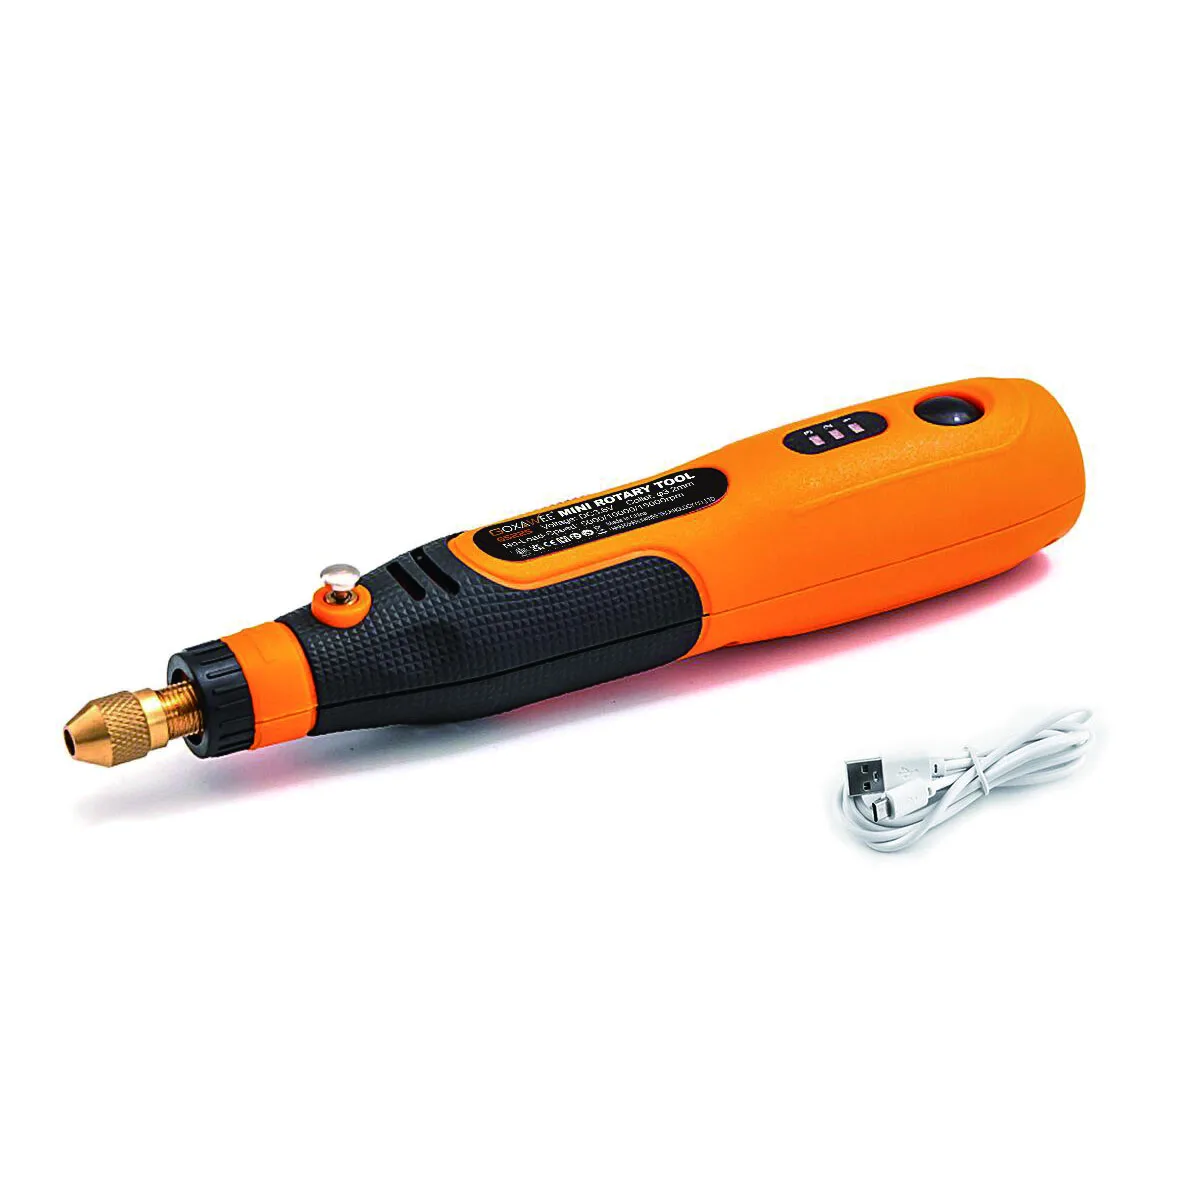 GOXAWEE Engraver Electric Cordless Mini Drill Grinder With Rotary Tools ... - $372.37